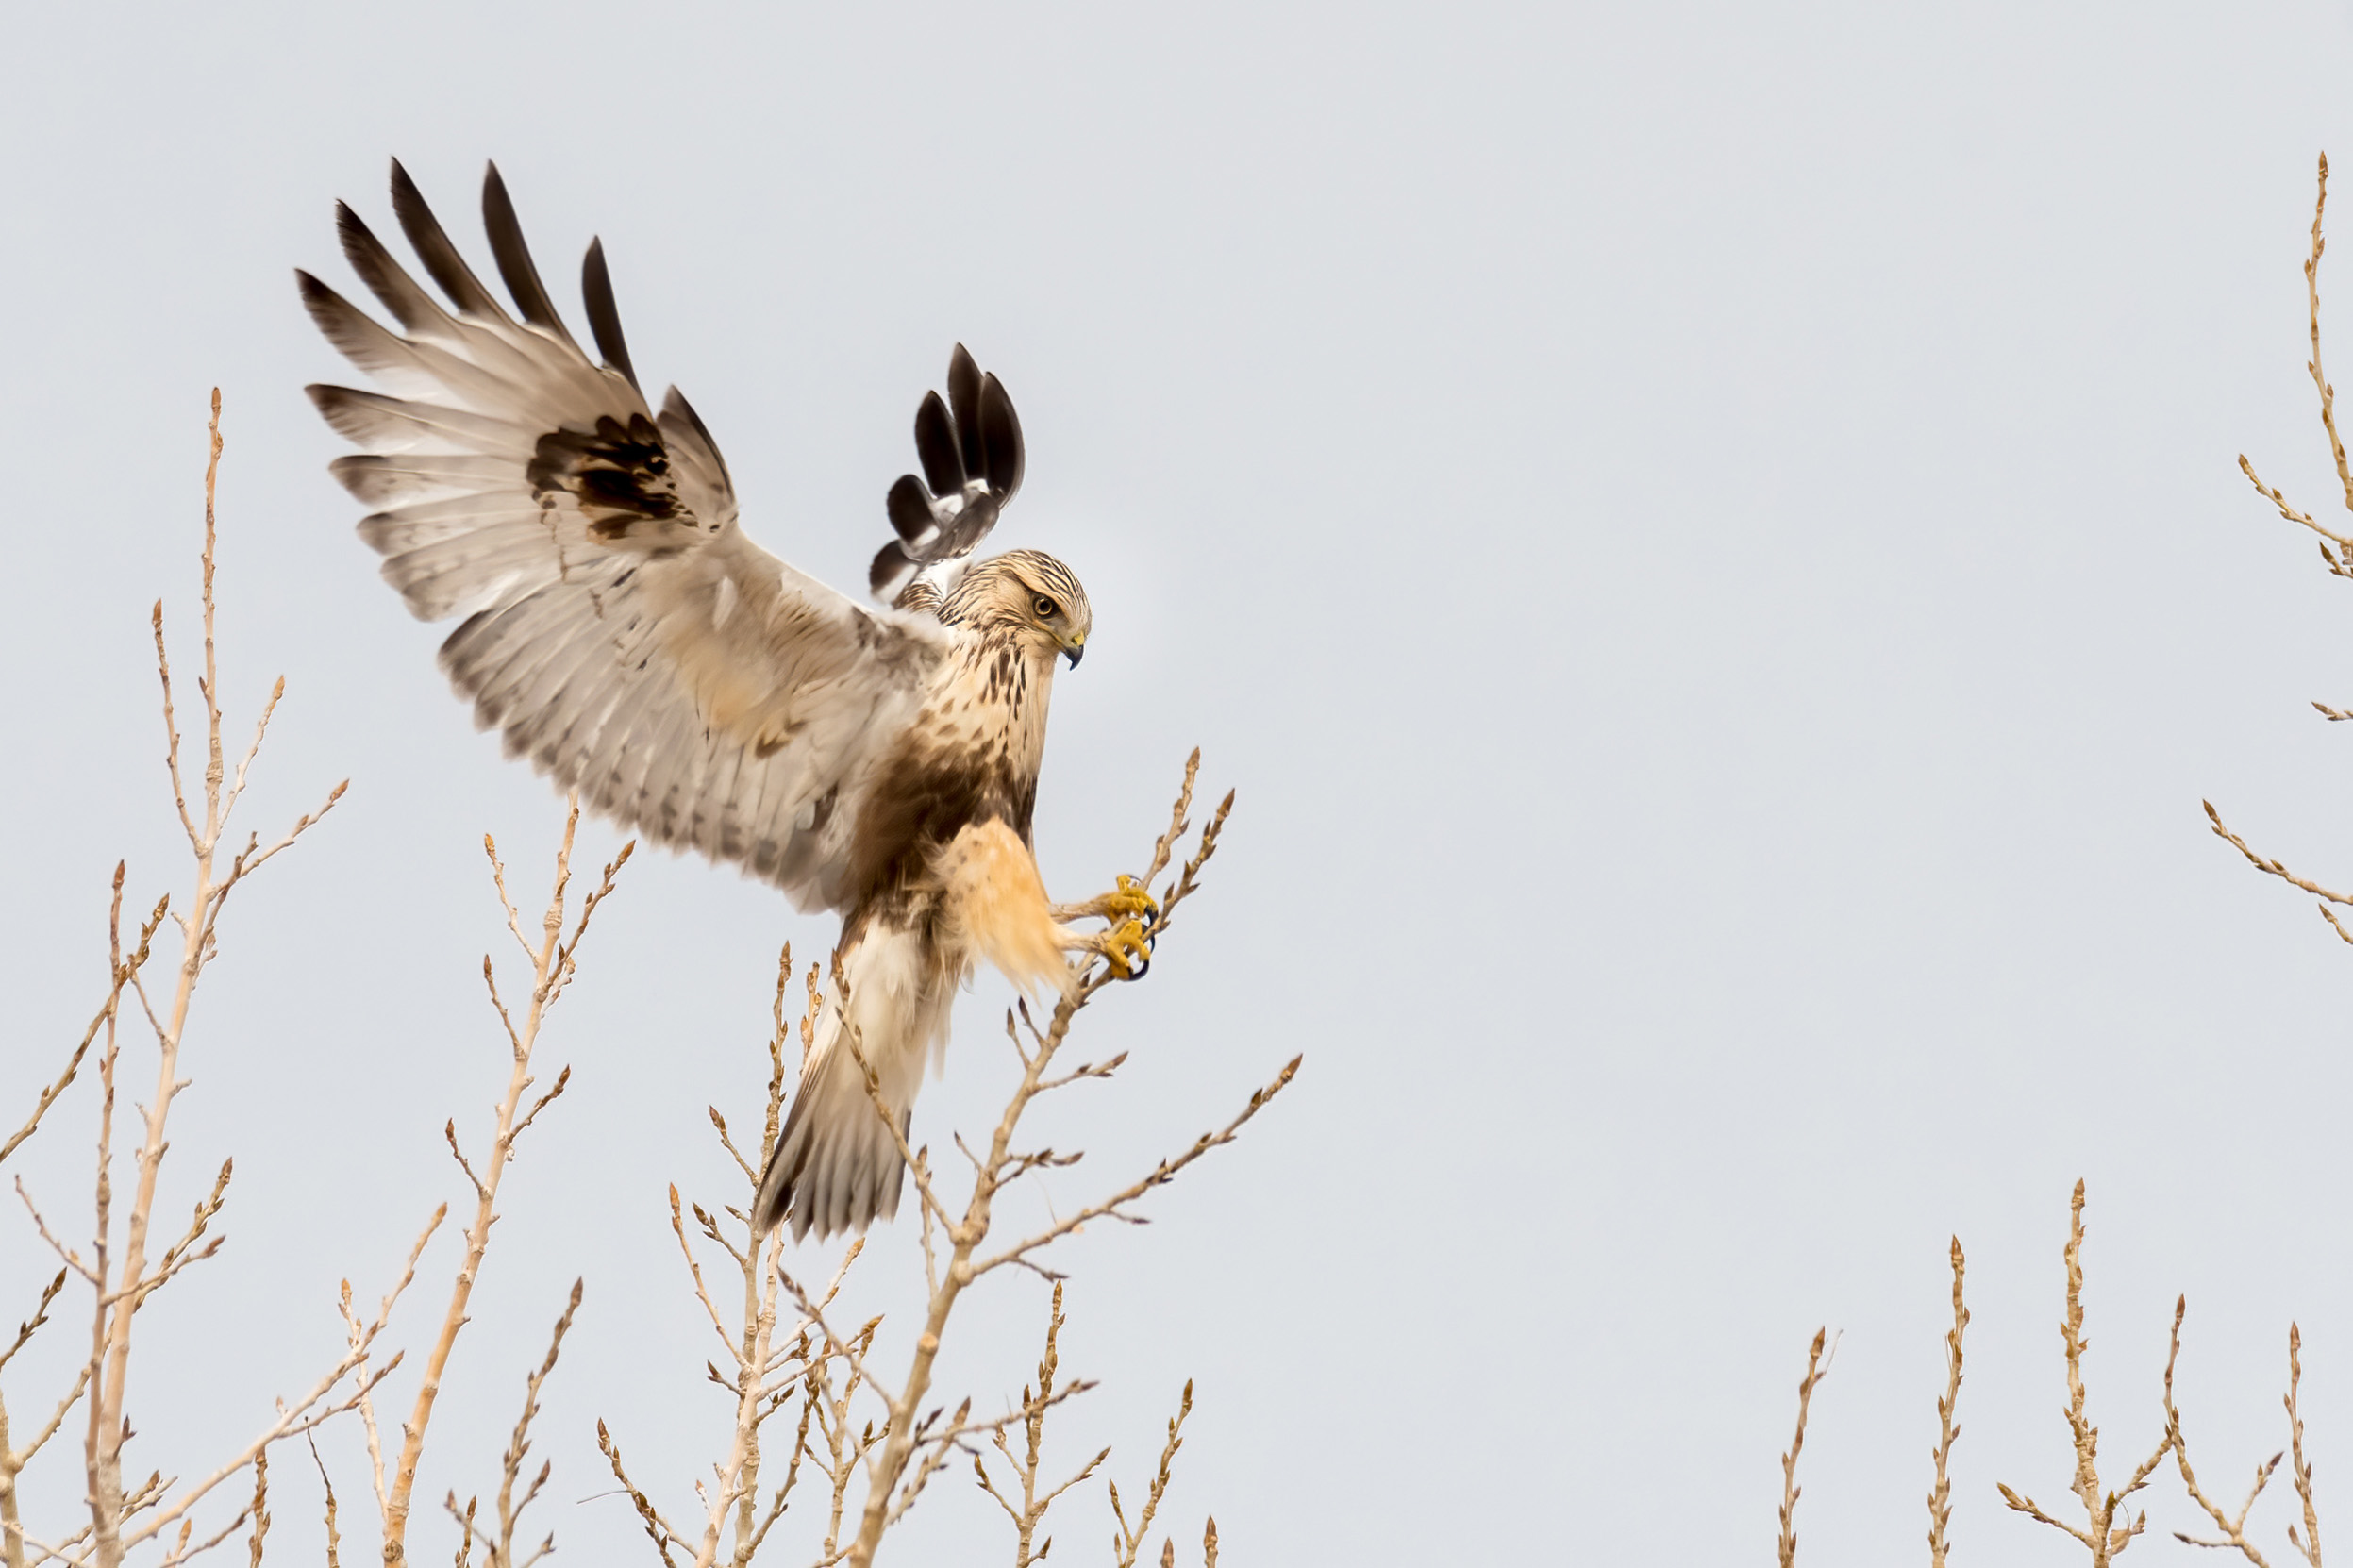 A Rough-legged Hawk landing on a small branch with grey skies behind it.